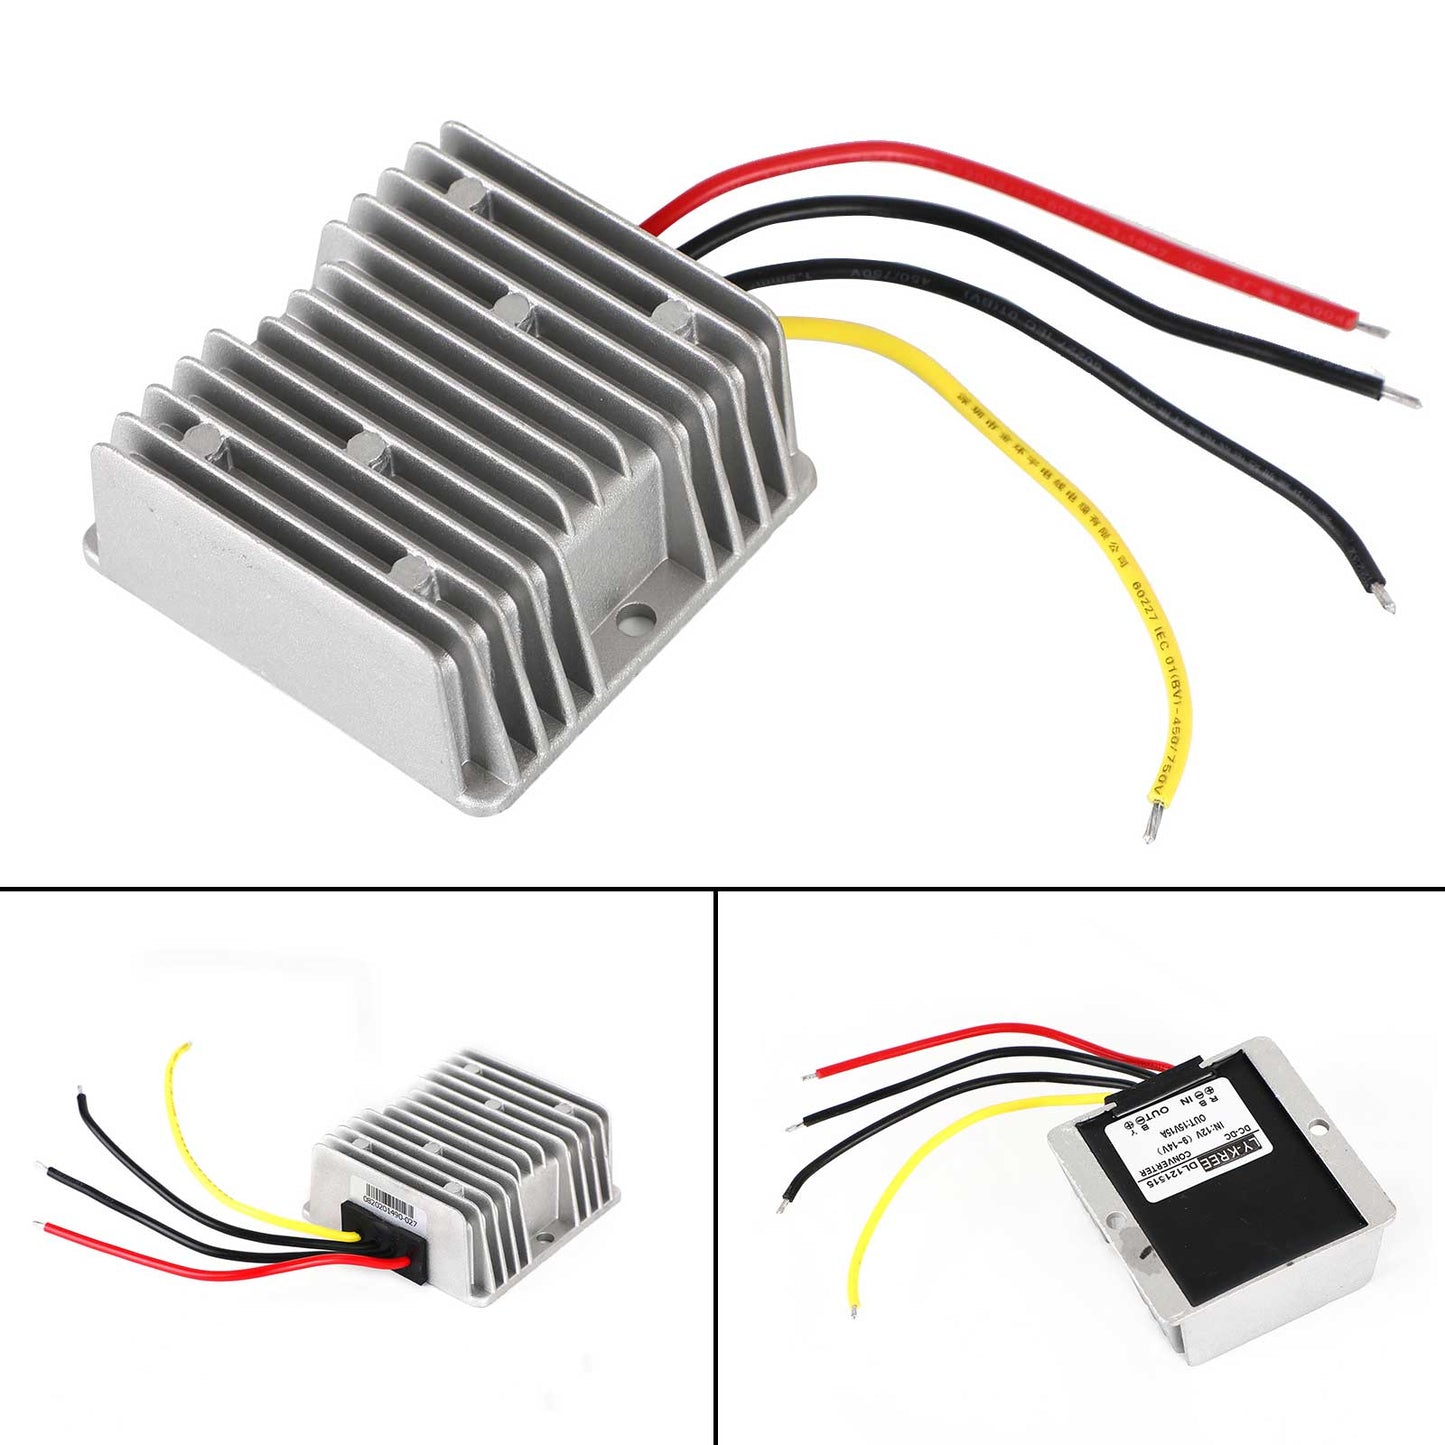 12V Auf 15V DC-DC Step Up Boost Spannungswandler 15A 225W Industrie-Netzteile